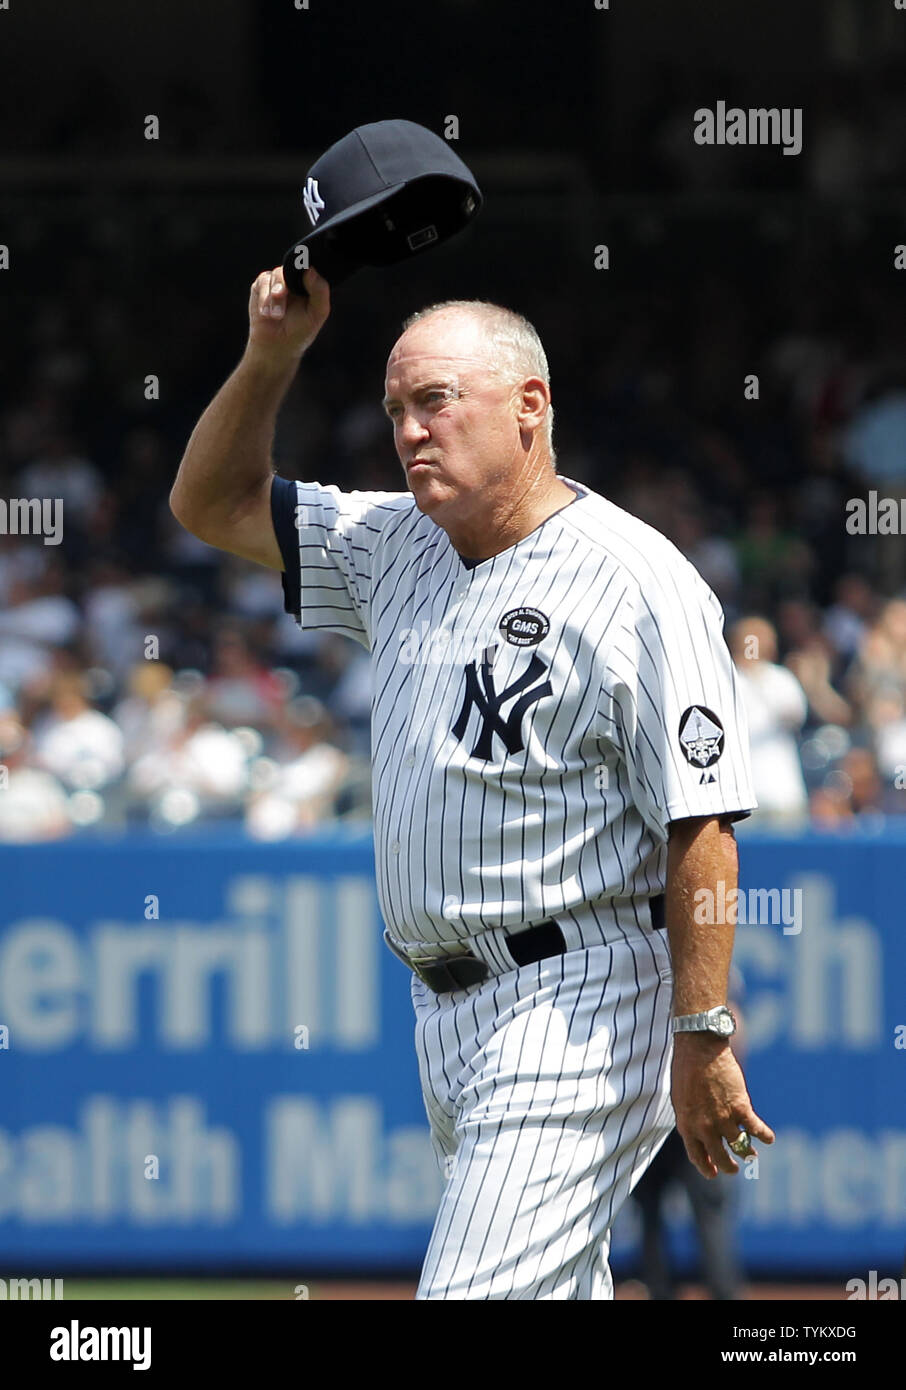 New York Yankees legend Graig Nettles is introduced at New York